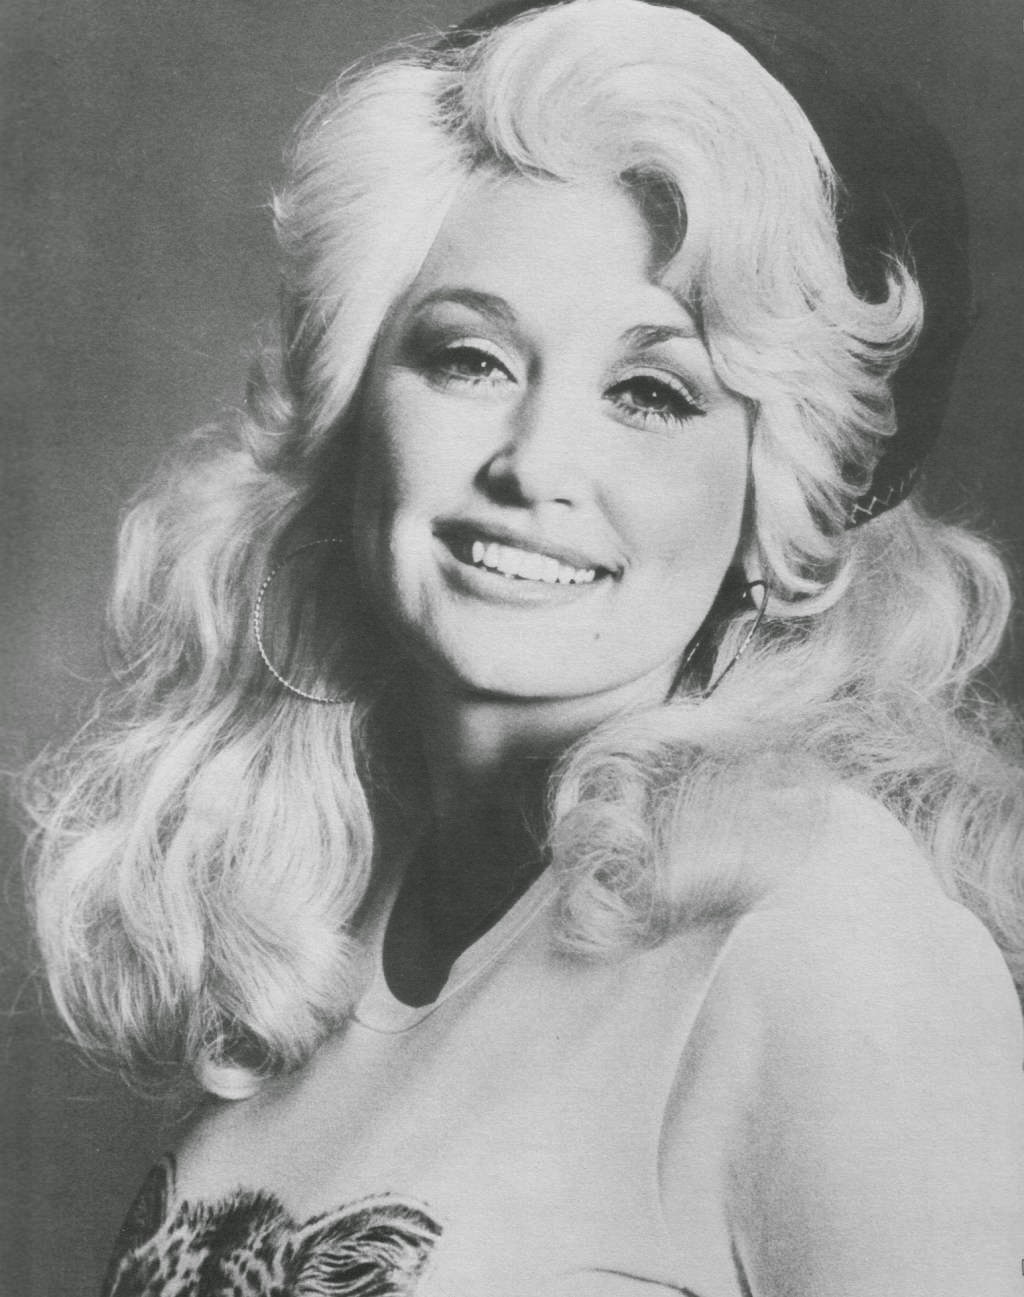 20 Beautiful Portrait Photos of Dolly Parton in the 1970s ~ vintage everyday